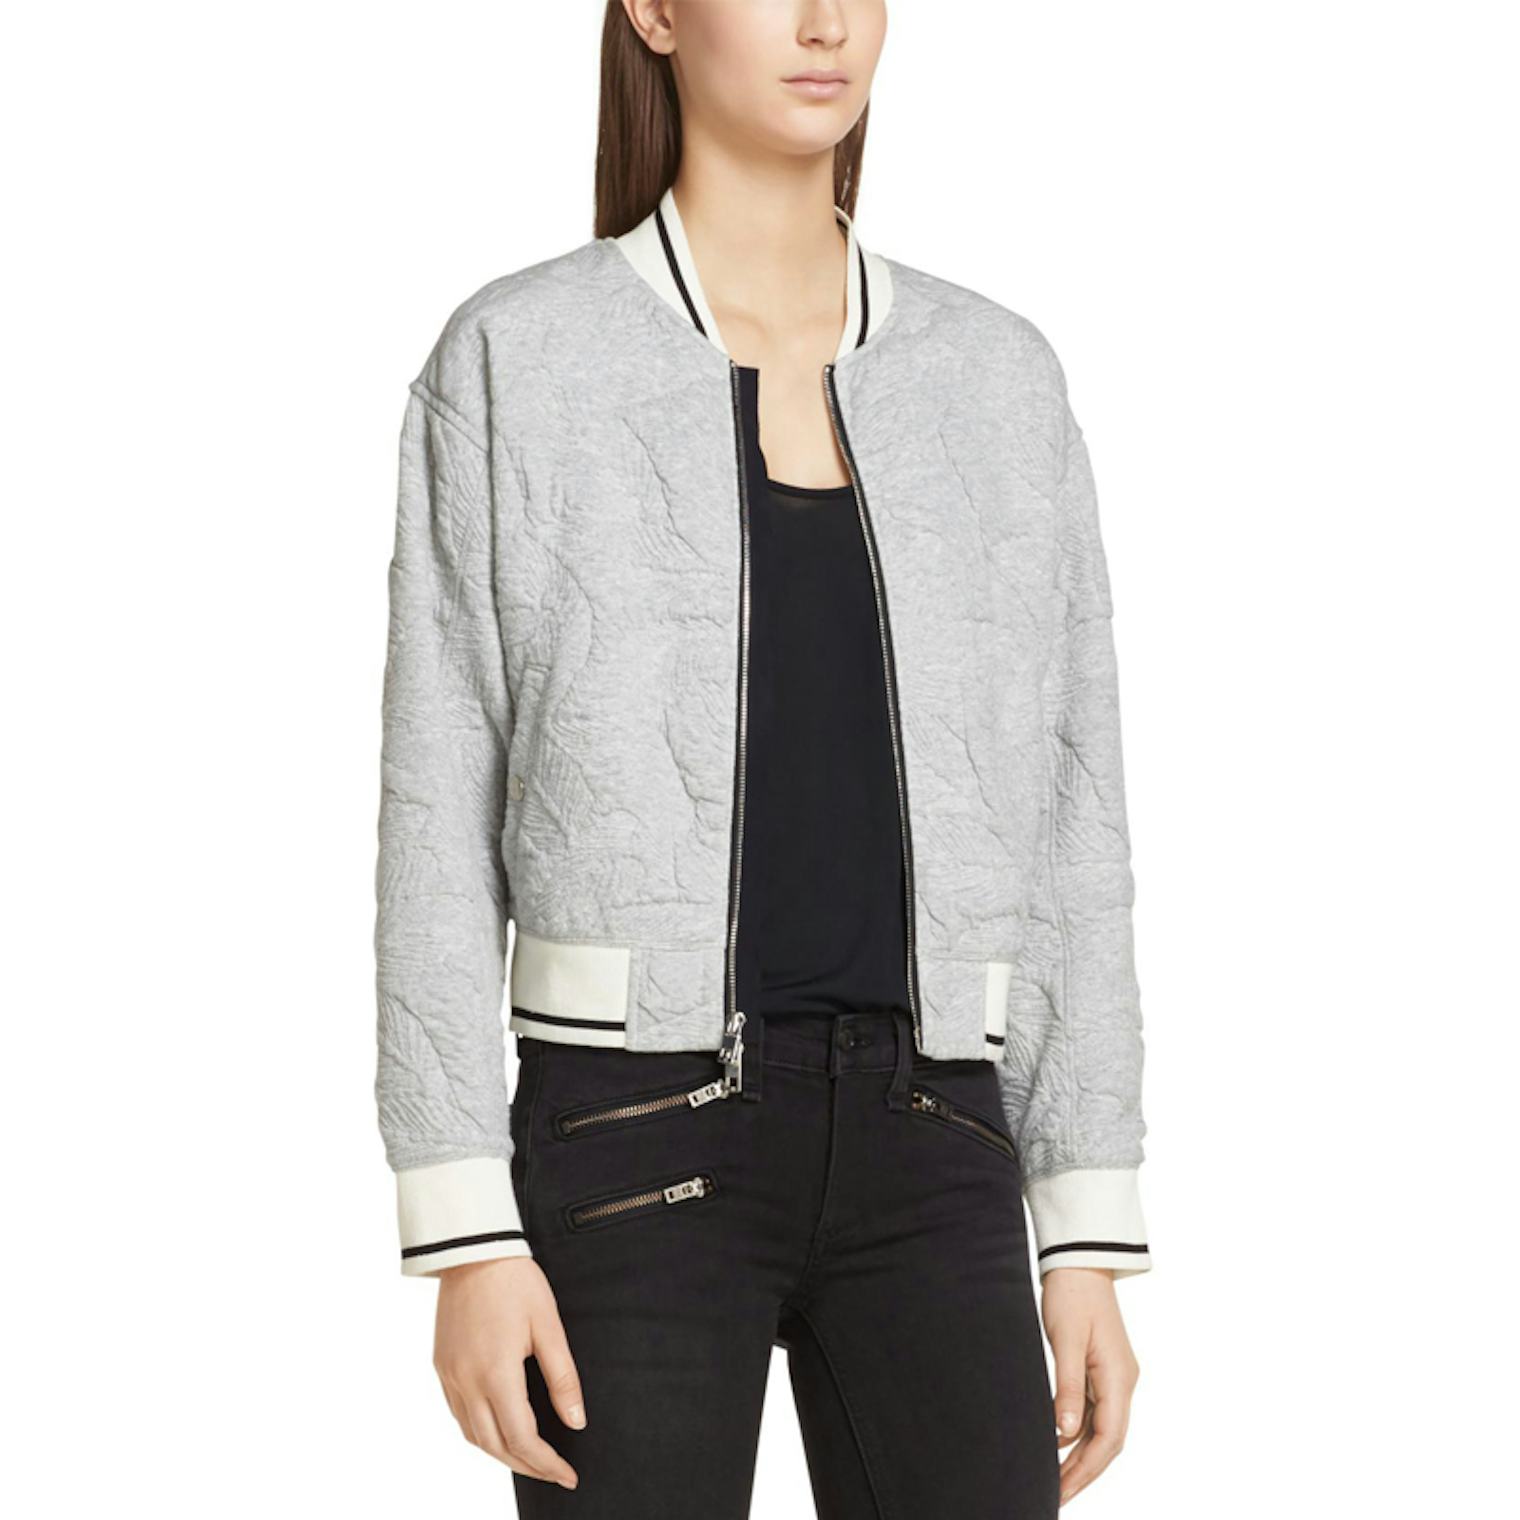 16 Bomber Jackets To Ease You Into Fall